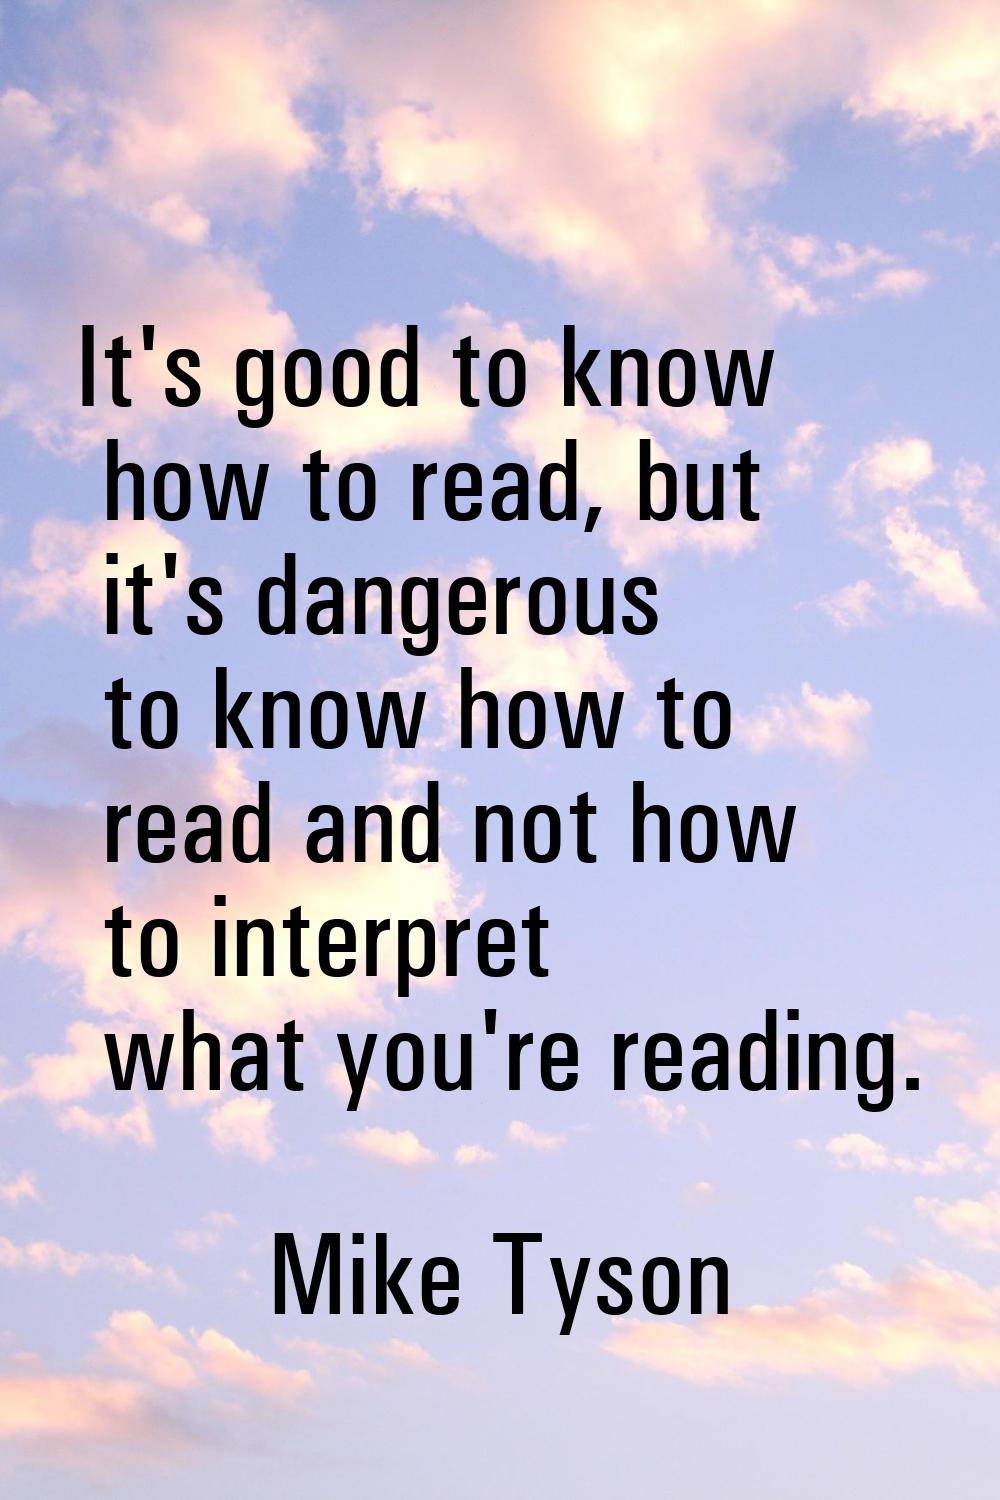 It's good to know how to read, but it's dangerous to know how to read and not how to interpret what